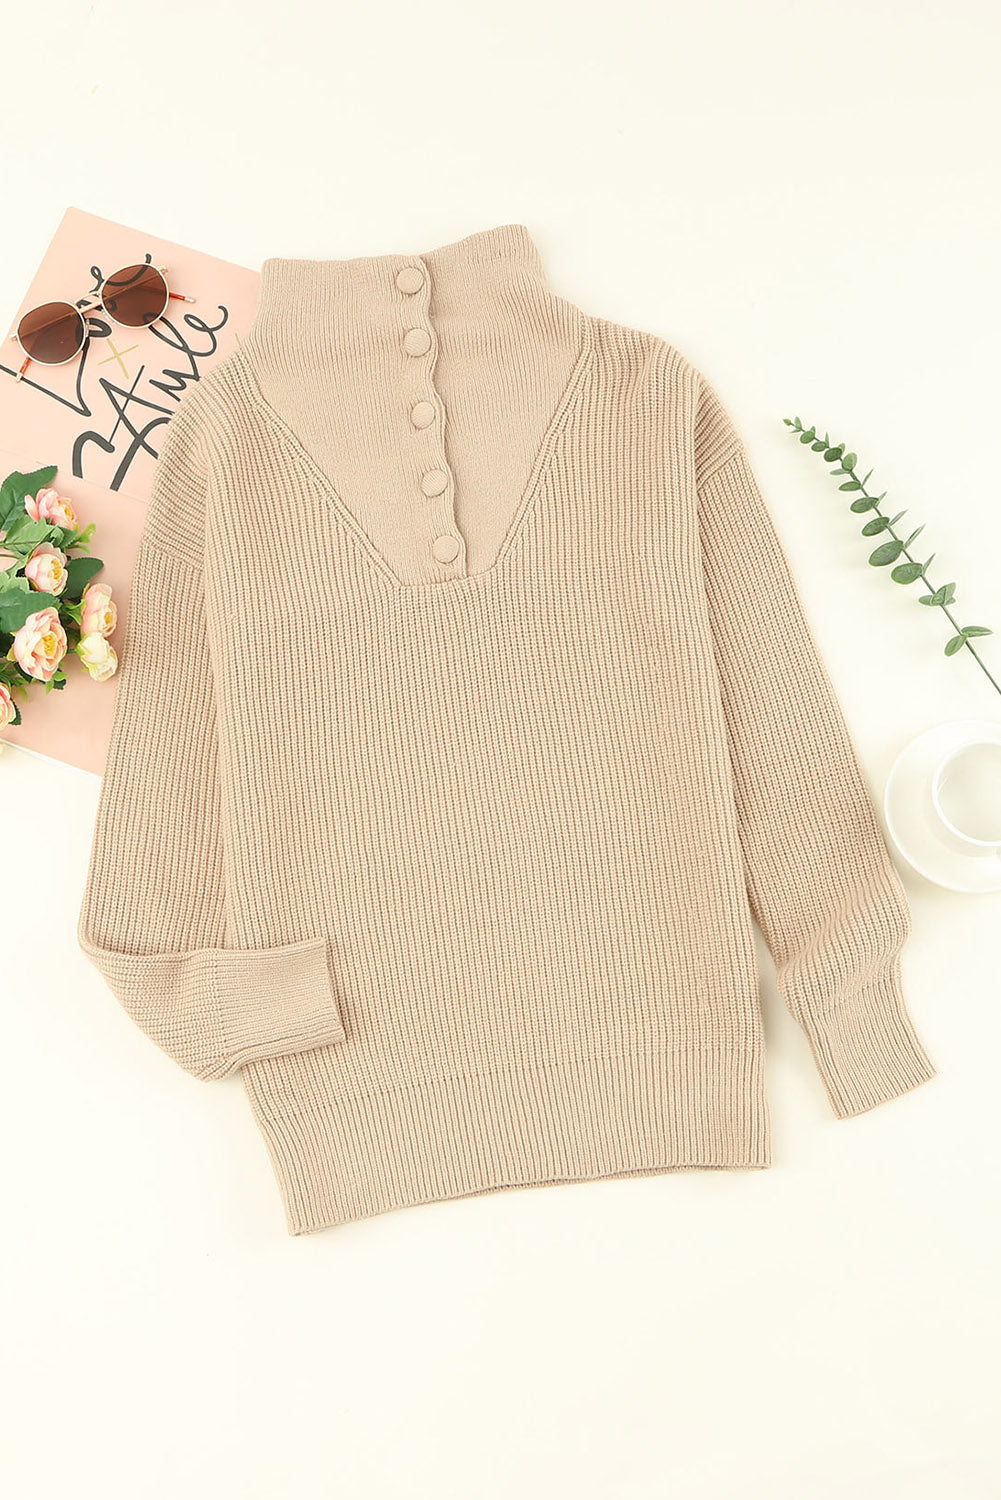 Khaki Buttoned Turn Down Collar Comfy Ribbed Sweater